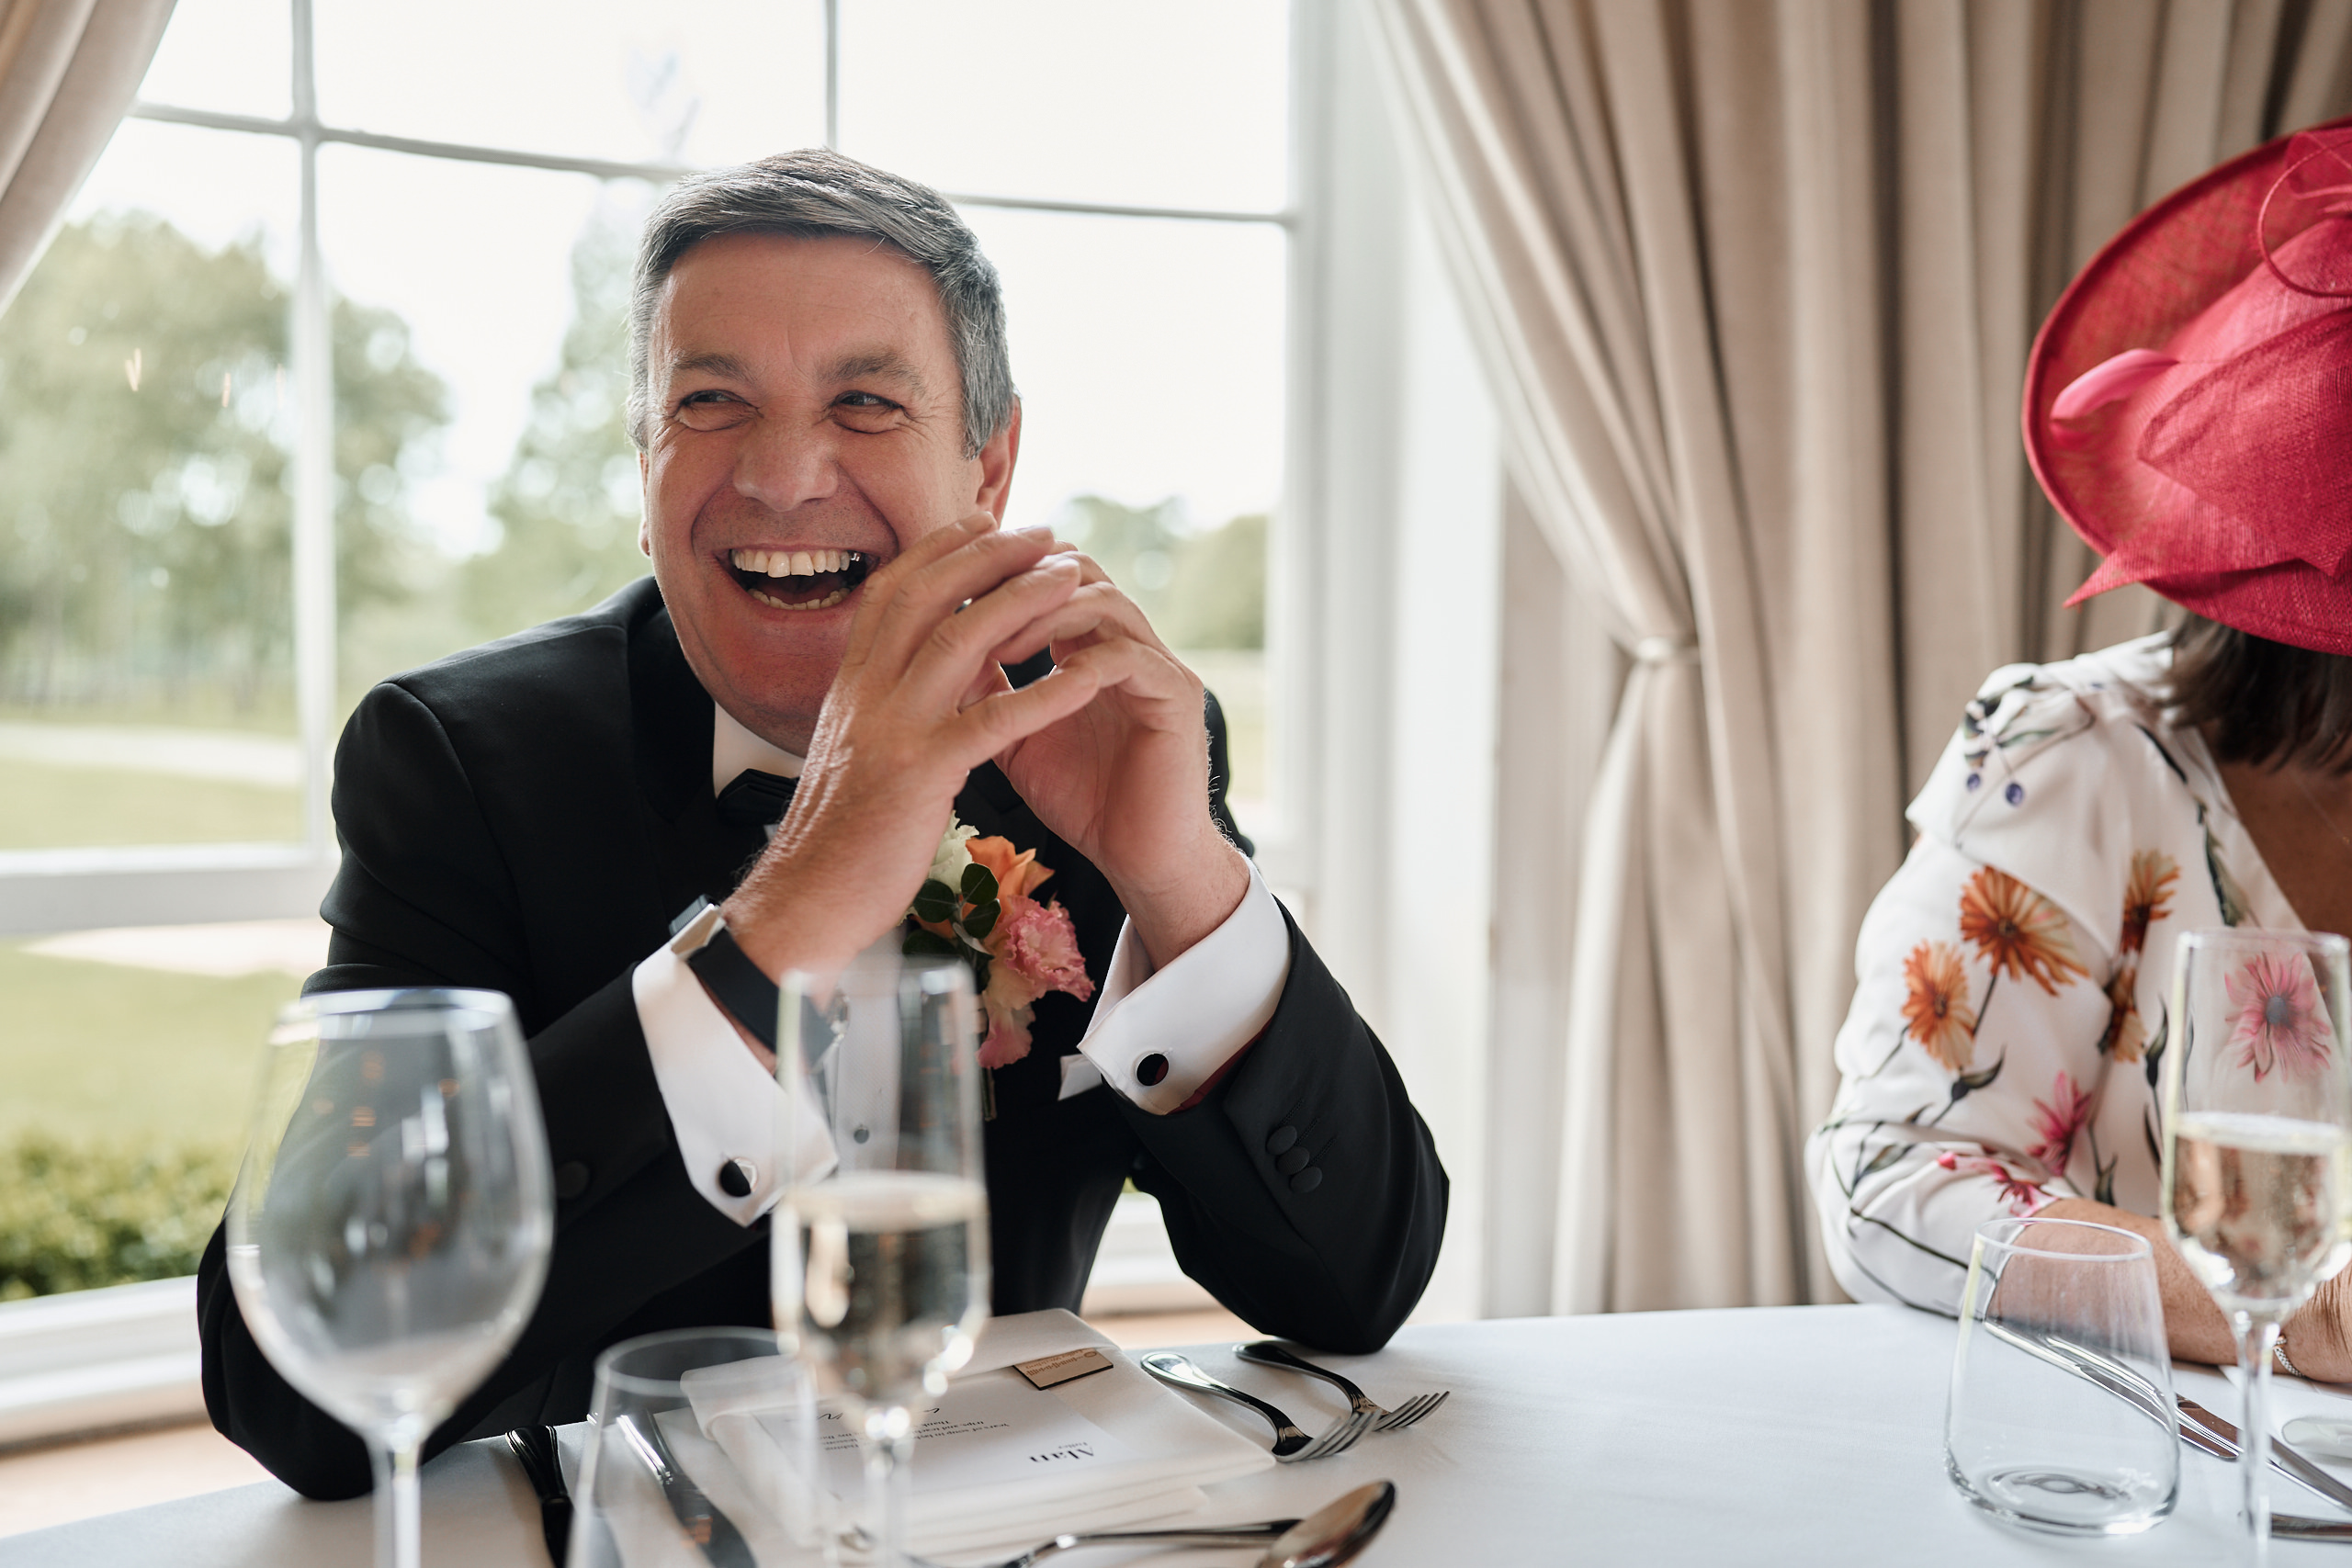 A man in a tuxedo laughing at a table.